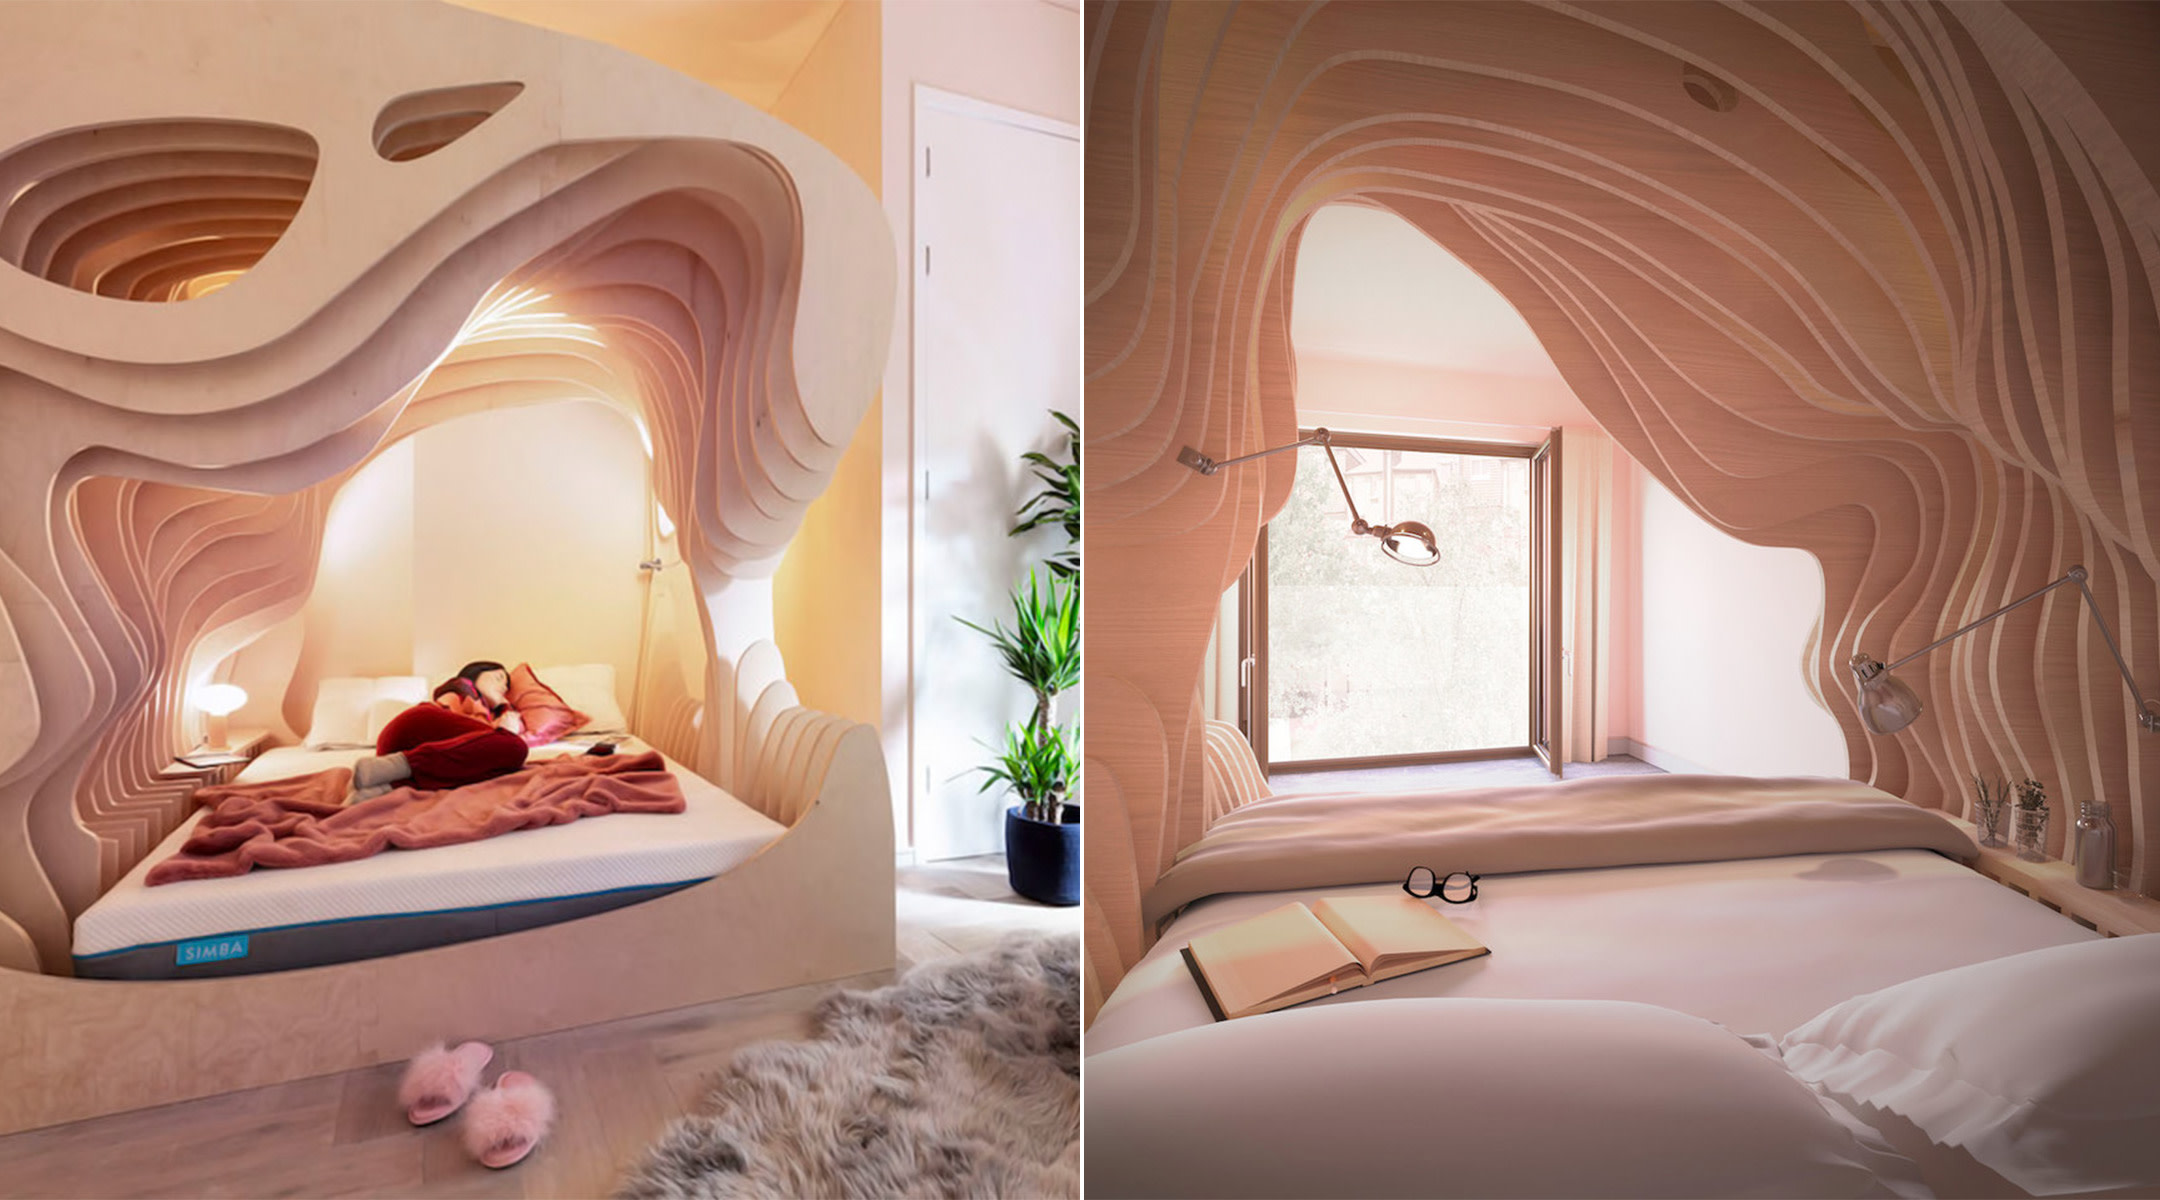 london hotel builds womb like rooms to promote better sleep